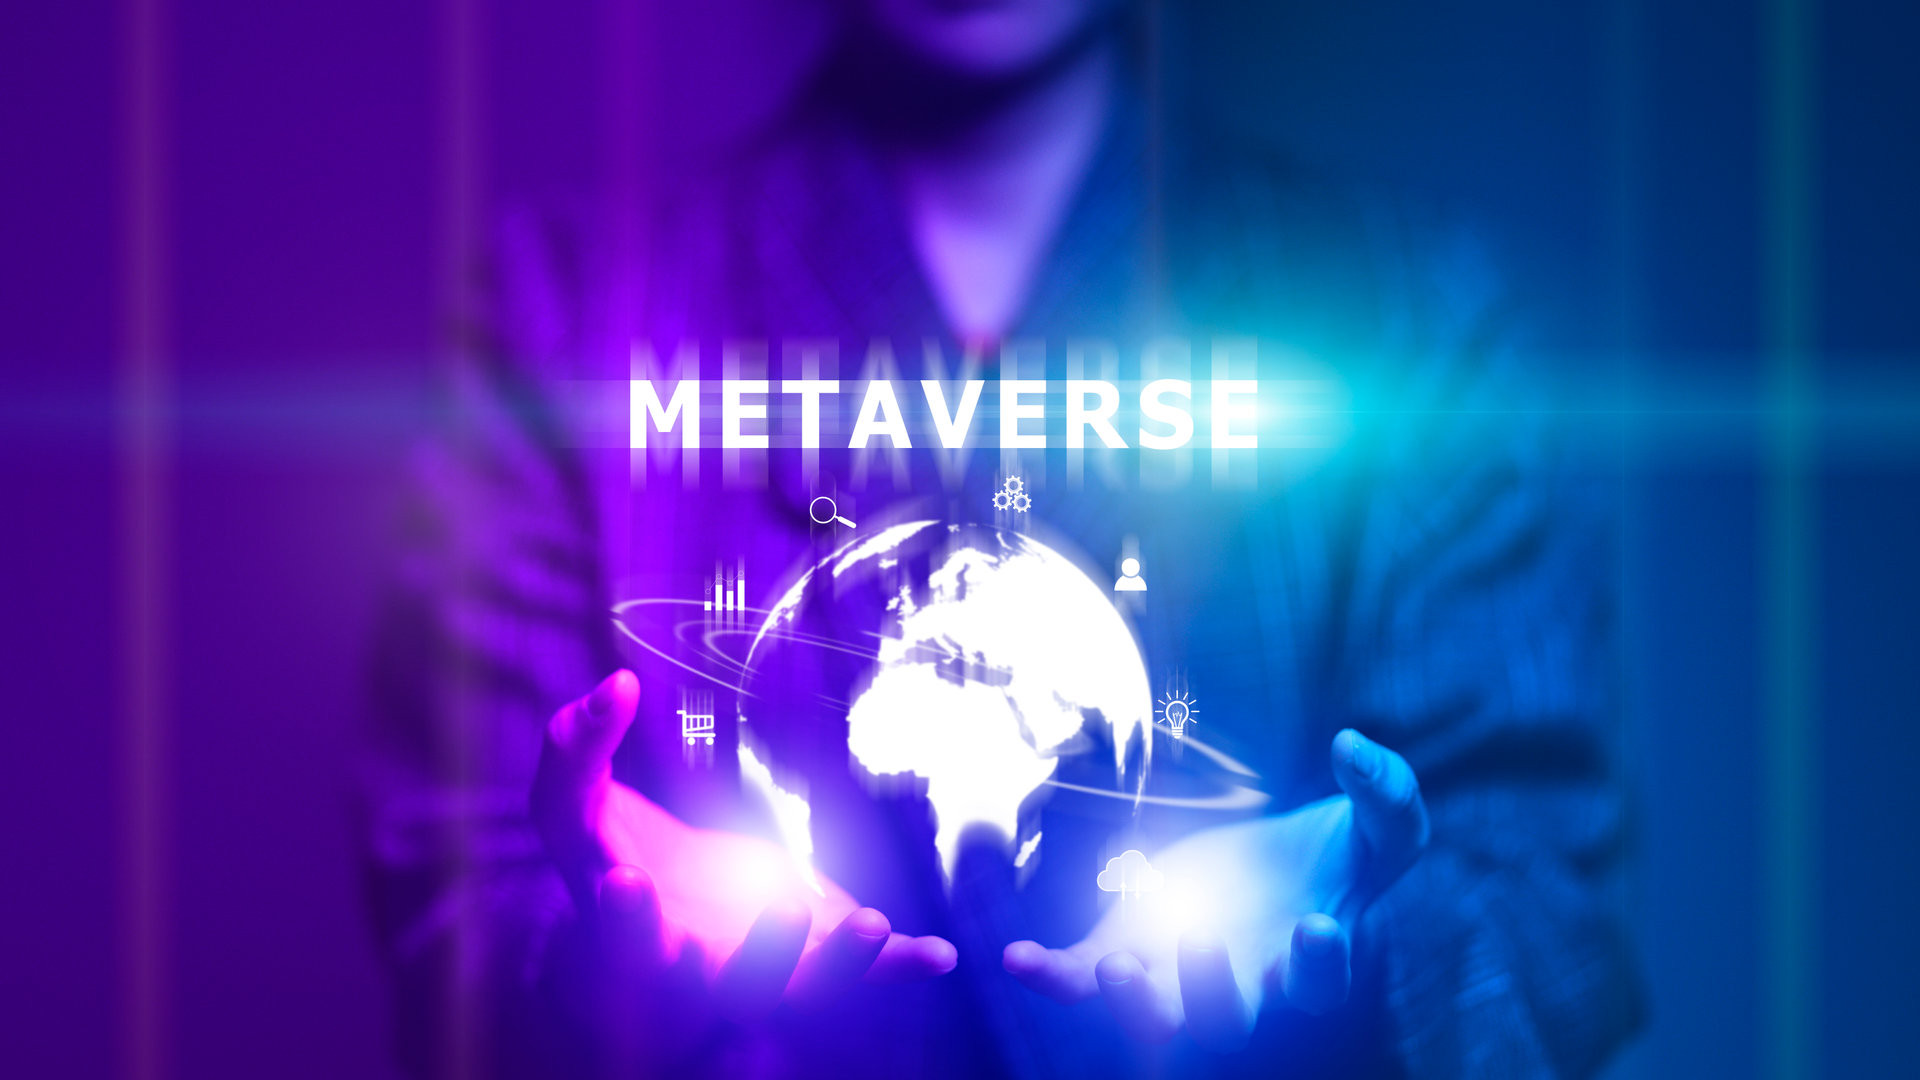 Metaverse Virtual Technology. Worldwide Business. Megatrends on Internet for Telecommunication, Finance, and Internet of Things